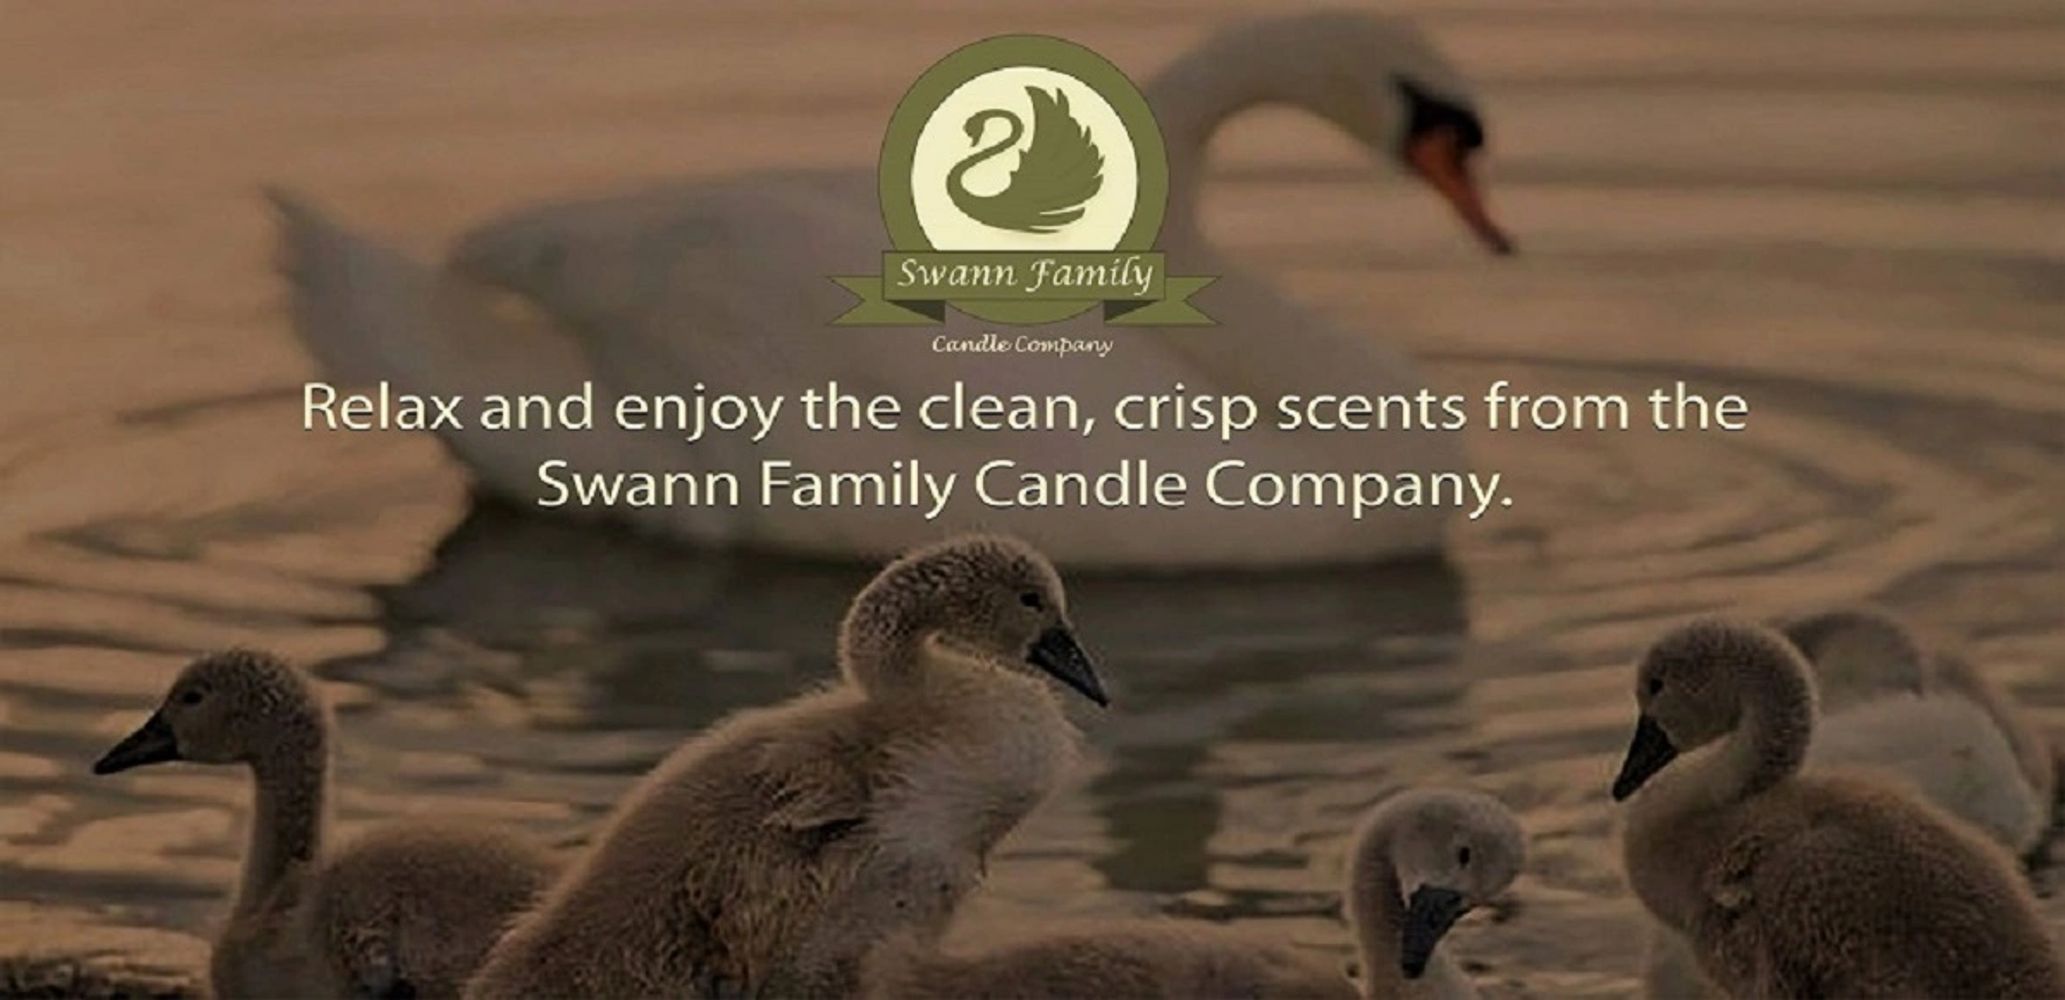 Relax and enjoy the clean, crisp scents from the Swann Family Candle Company.